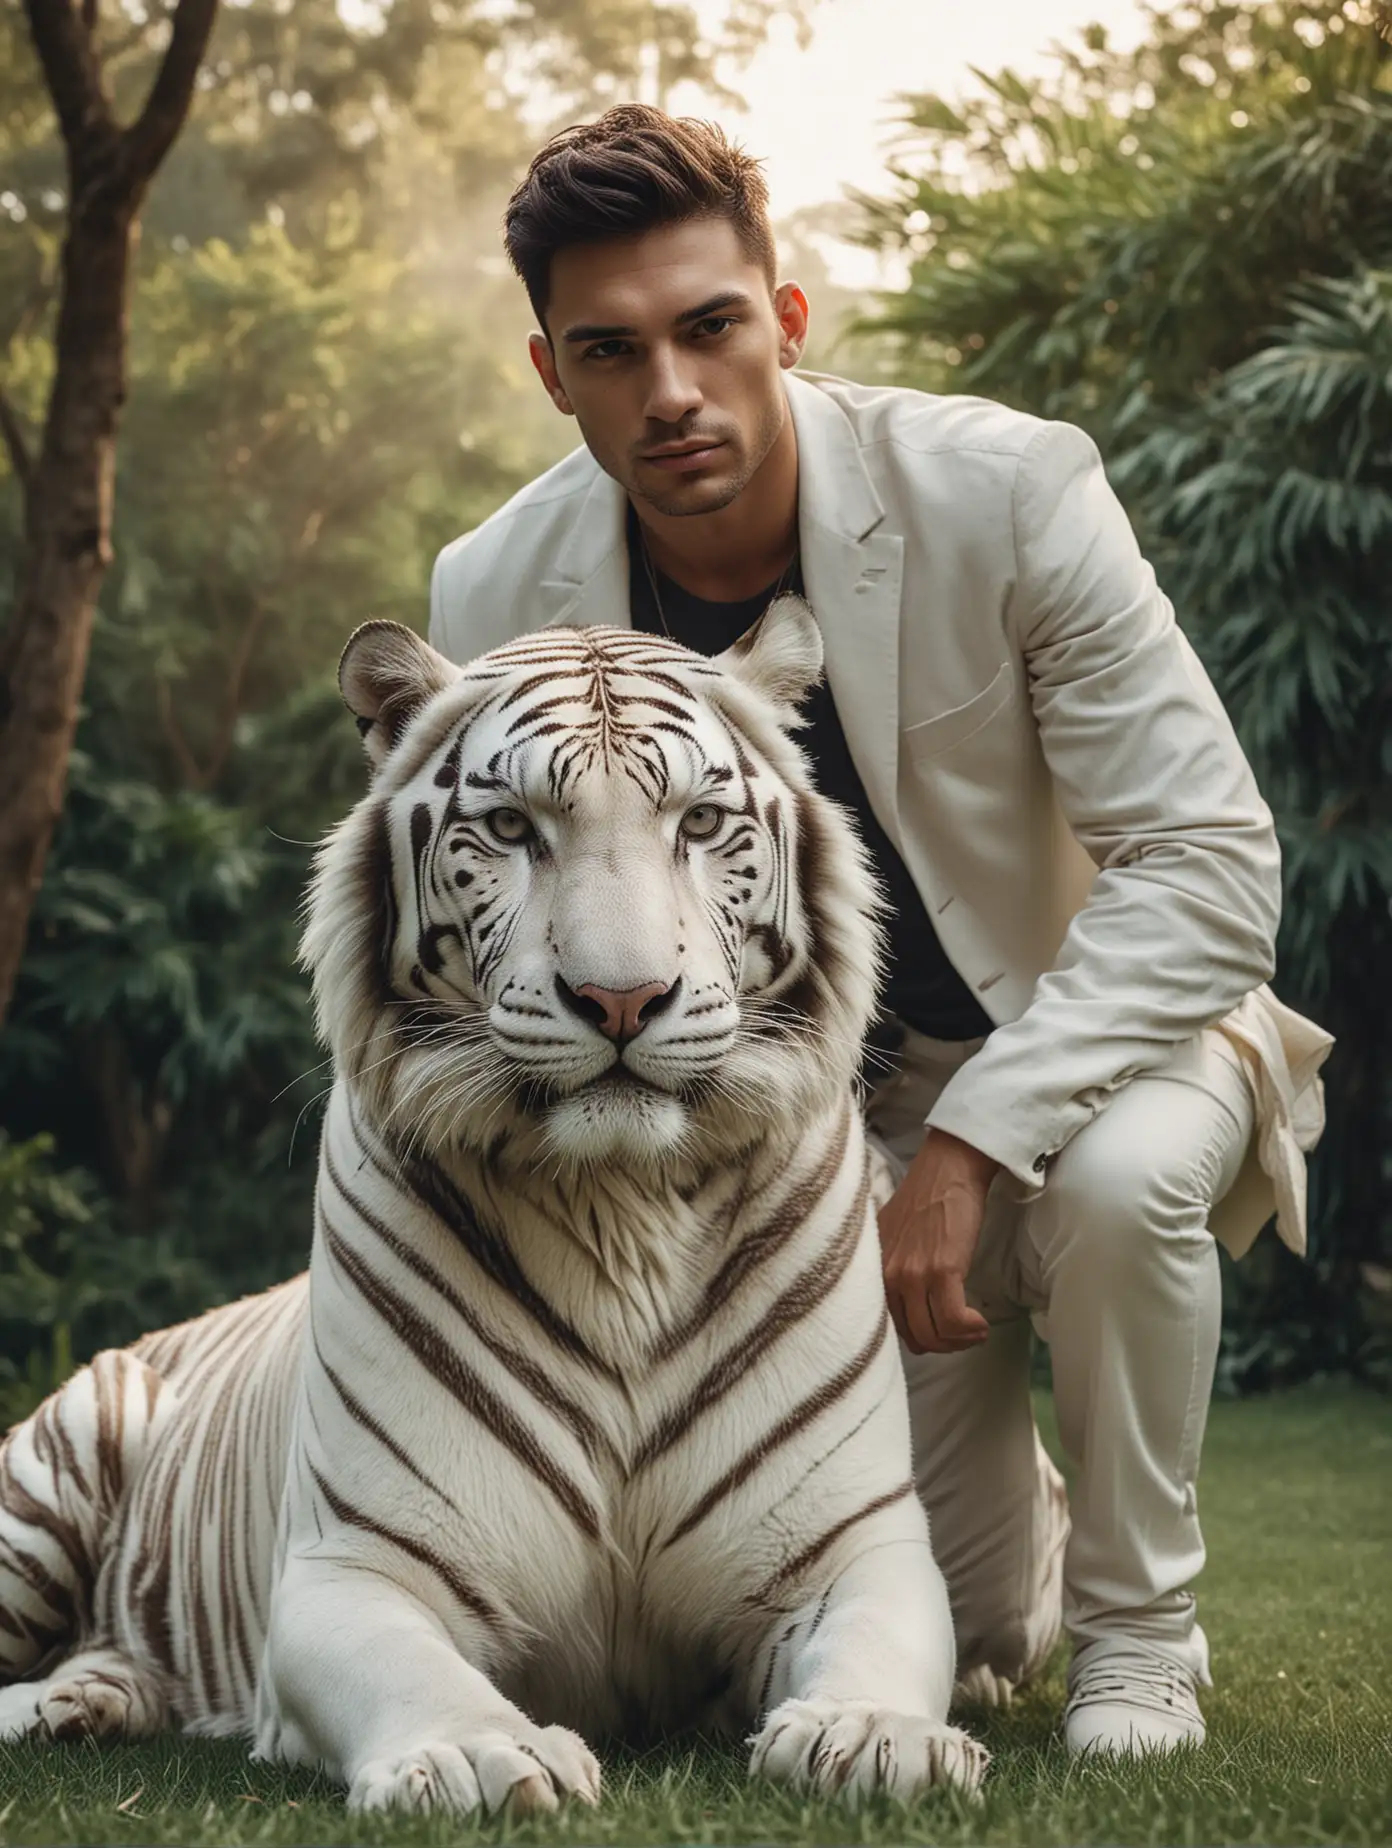 Handsome Brazilian Man Posing with Pet White Tiger in Surreal Outdoor Portrait